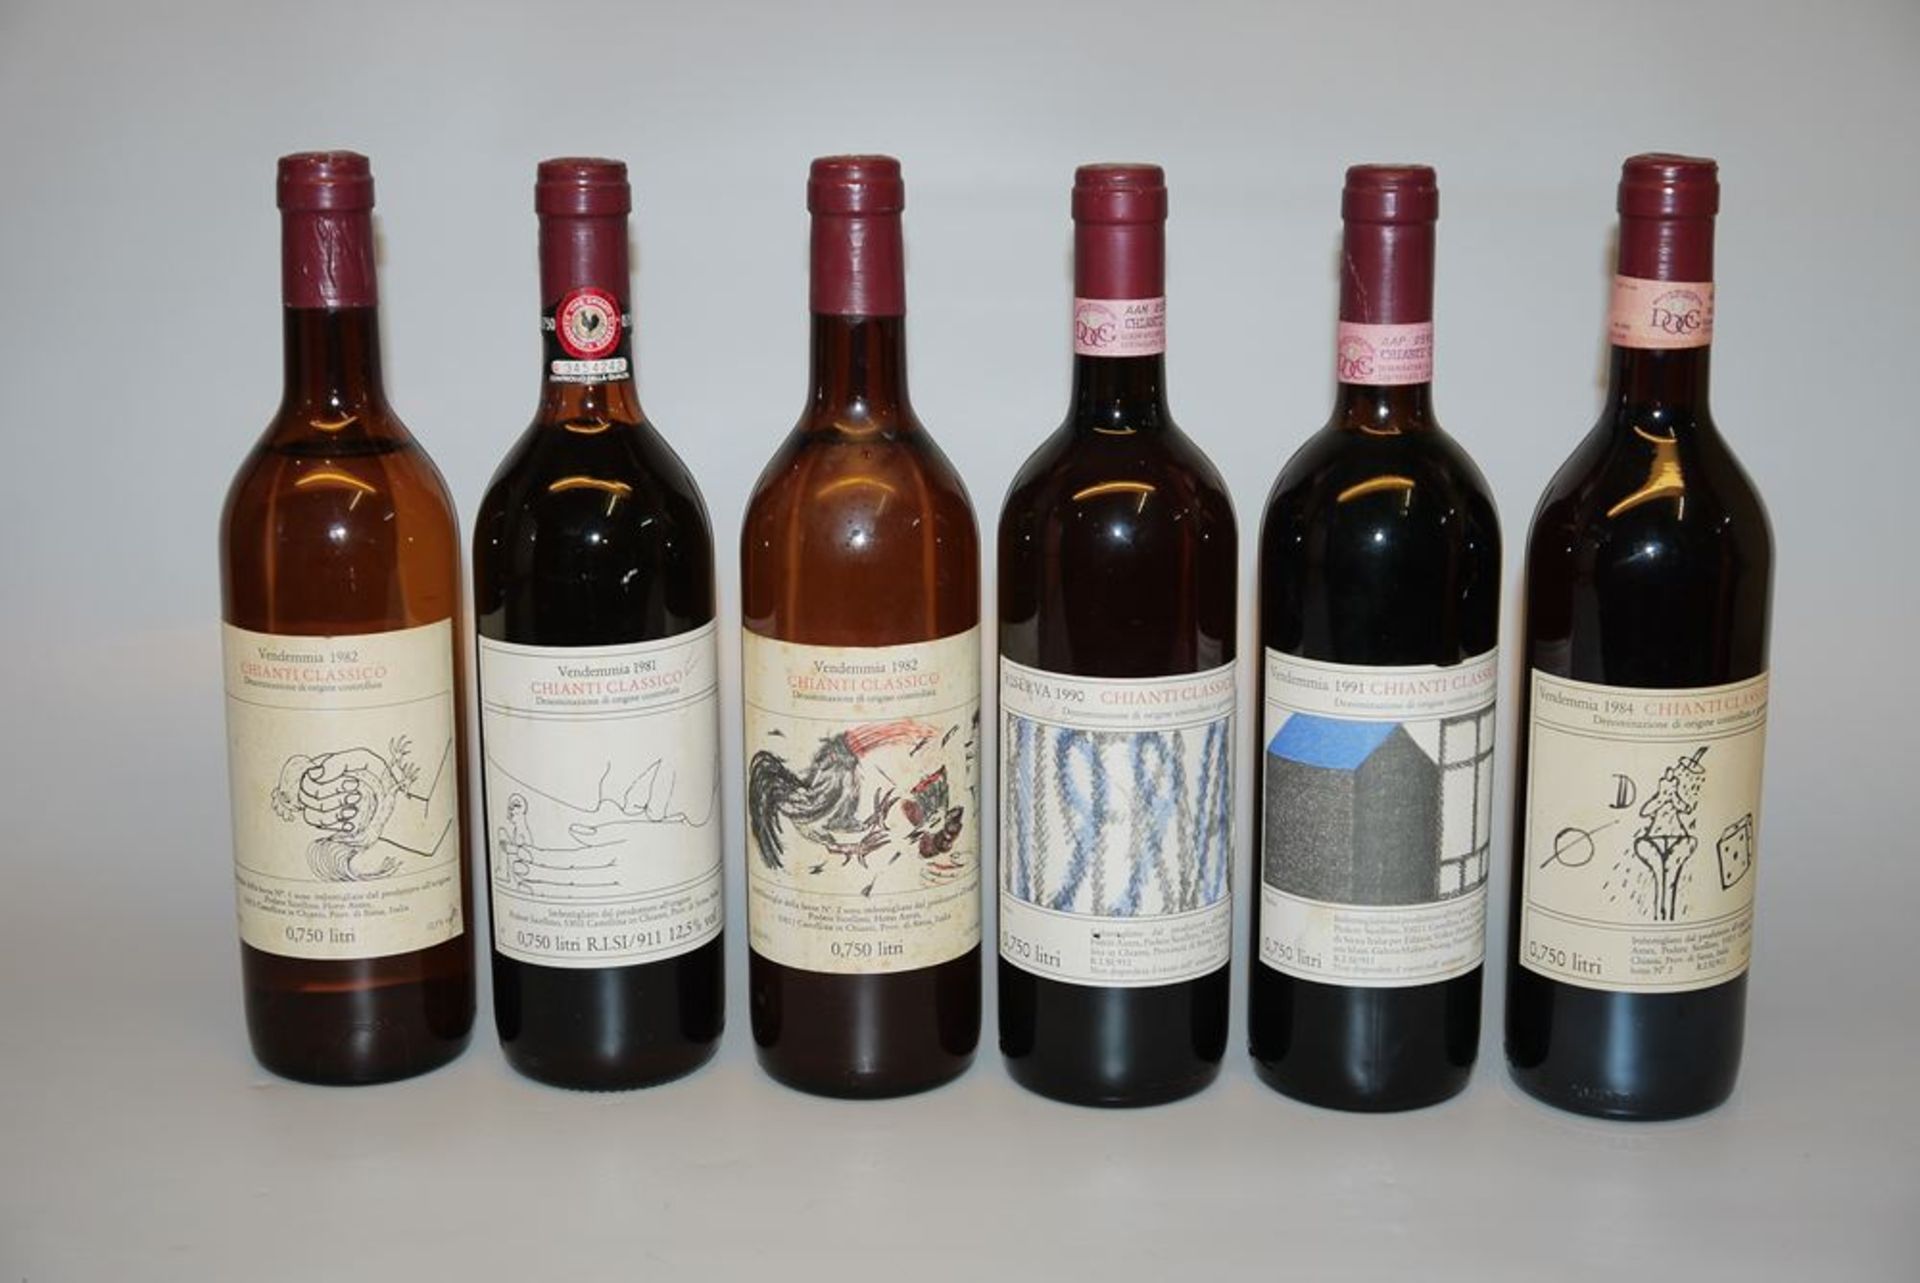 Horst Antes, 6 bottles of red wine from his own vineyard in Chianti with artist labels